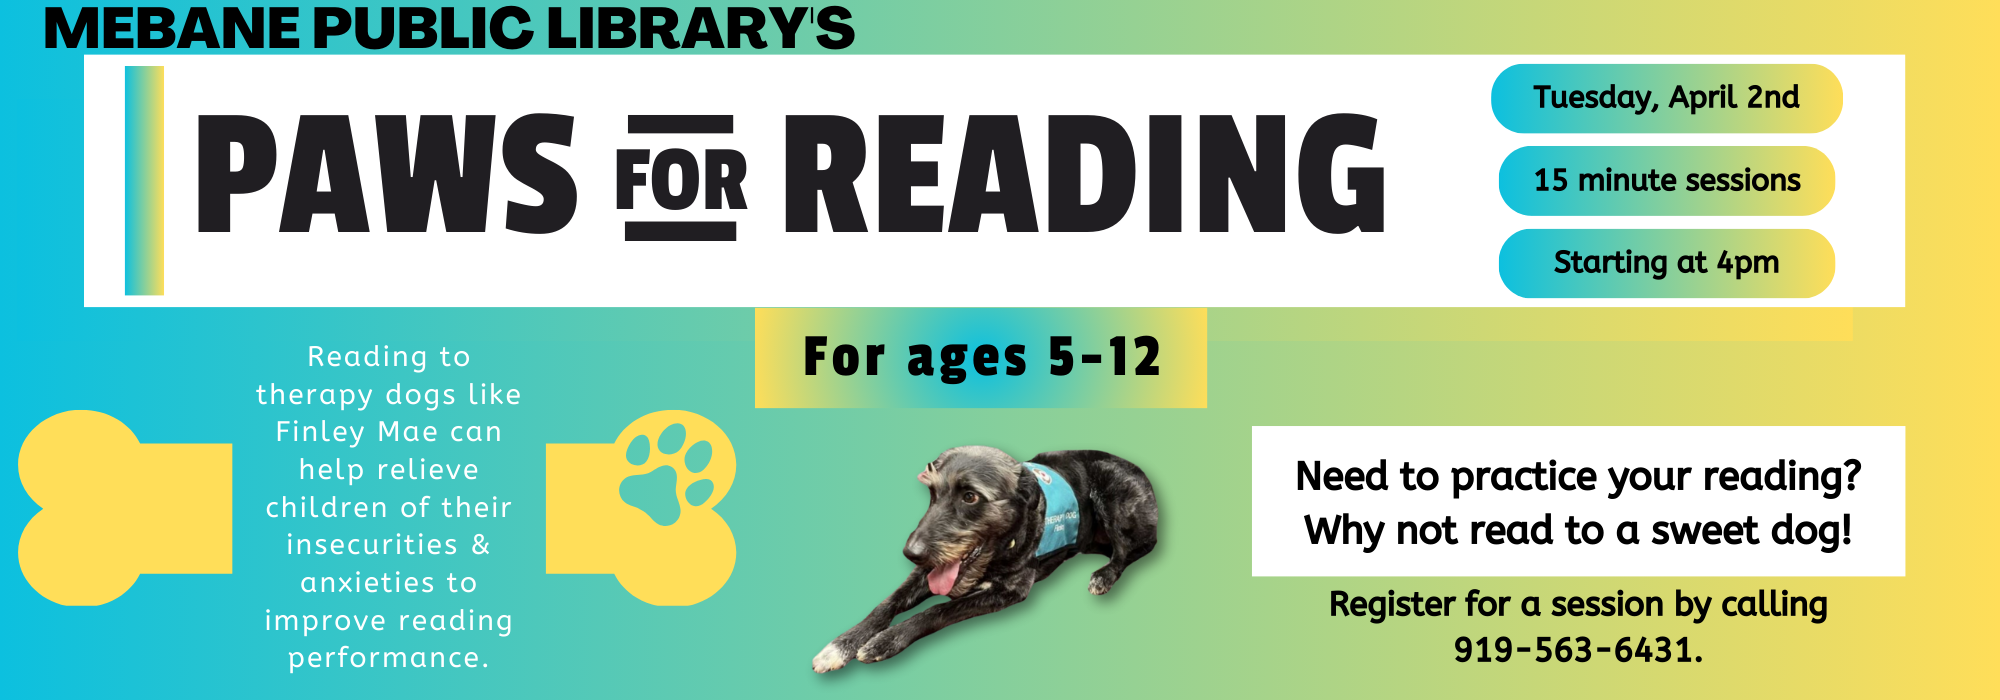 Copy of MEB Paws for Reading April ’24 Website and Digital Sign (10 × 3.5 in)